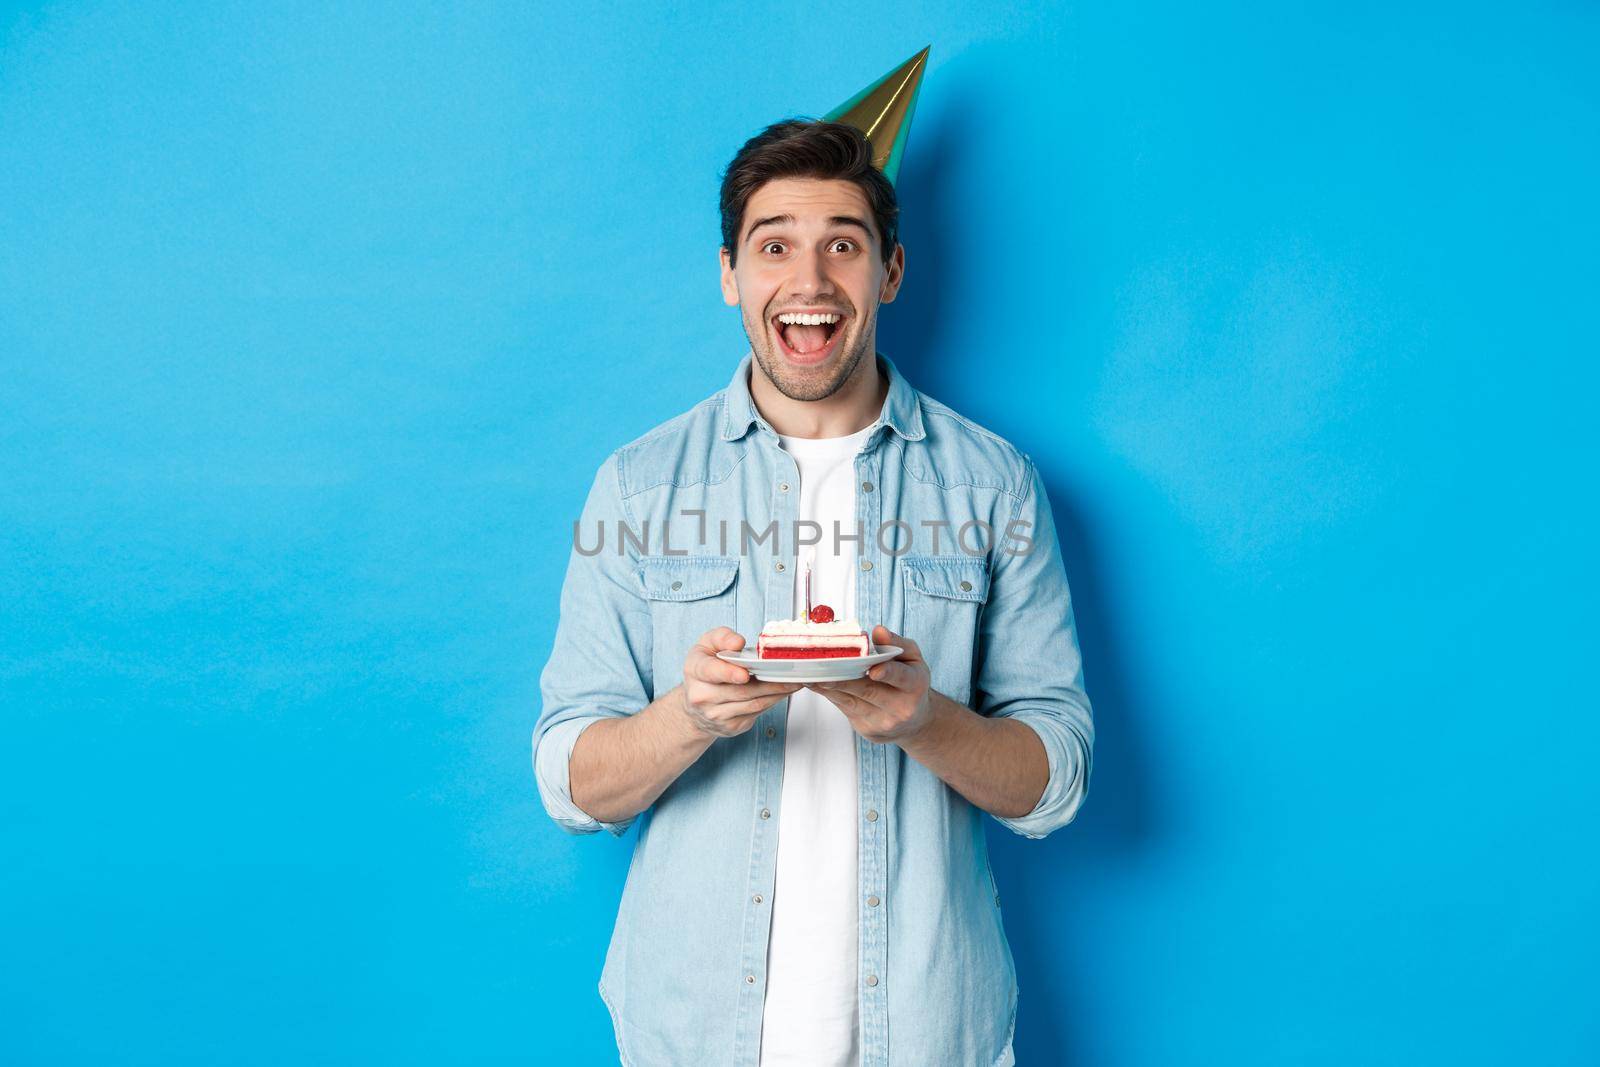 Cheerful young man celebrating birthday in party hat, holding b-day cake, standing against blue background.